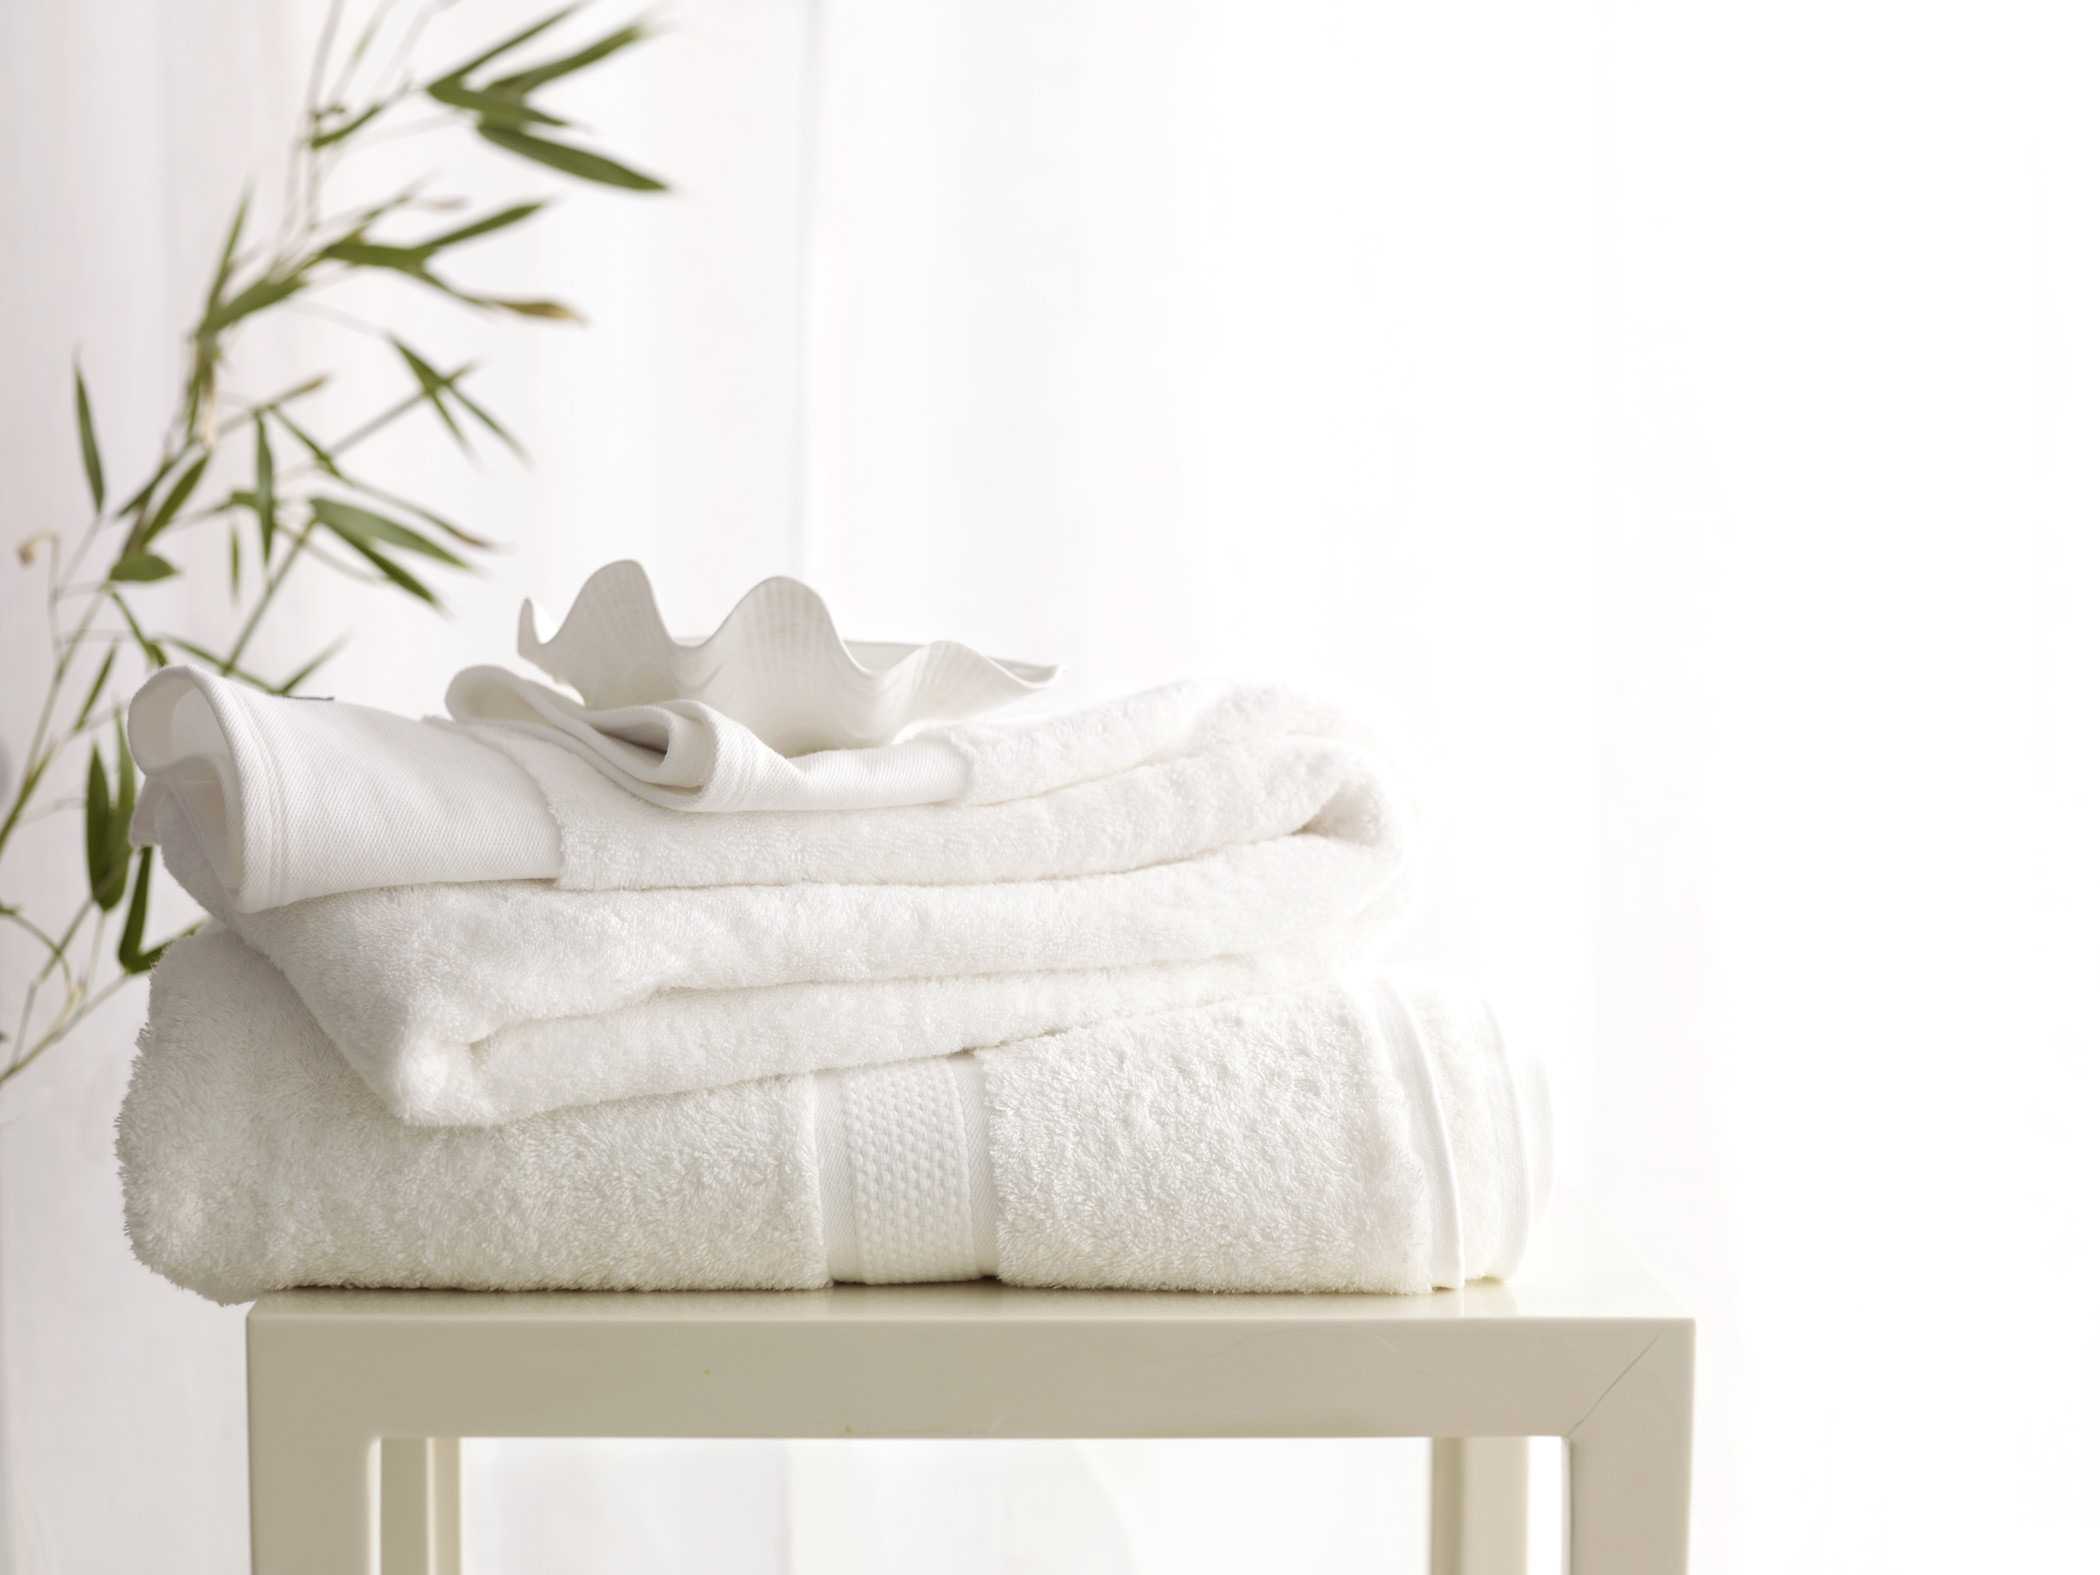 fresh white towels on top of a table next to plants